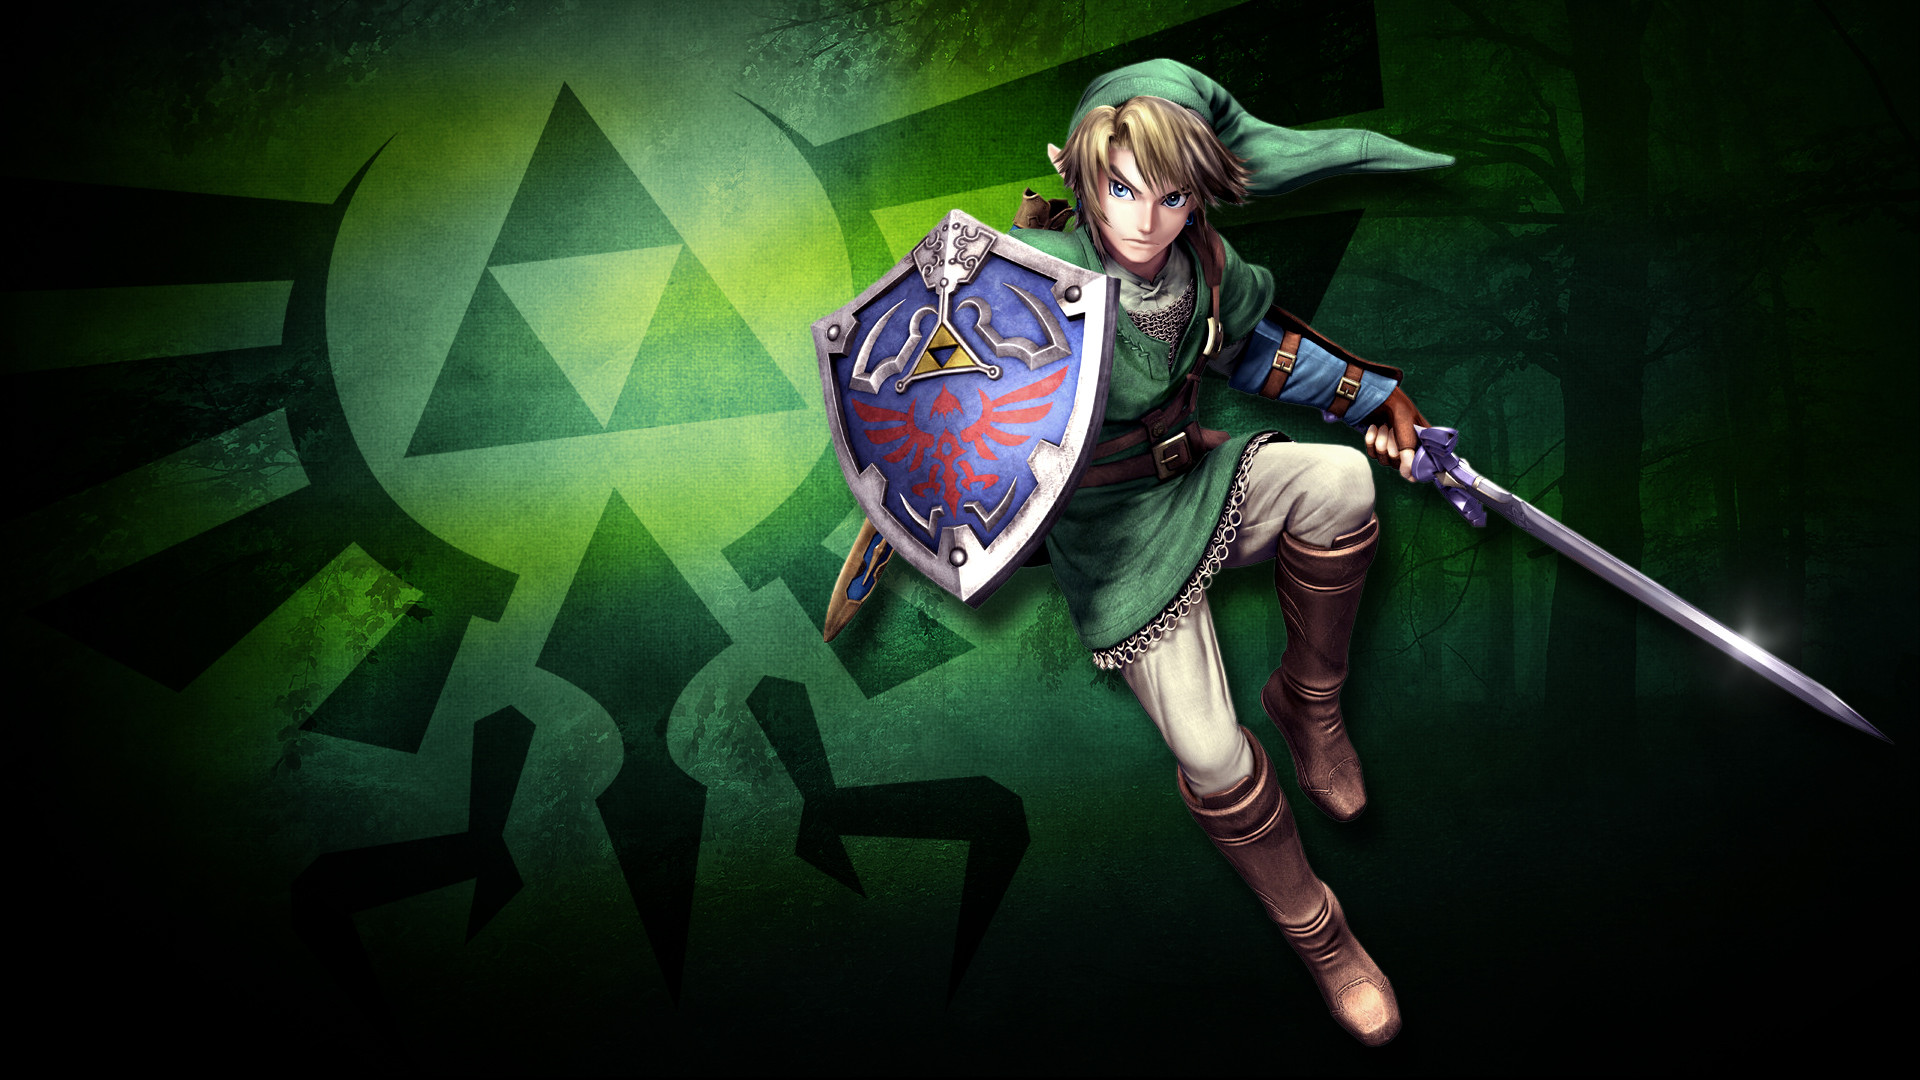 1920x1080 1000+ images about Wallpaper on Pinterest Zelda - HD Wallpapers